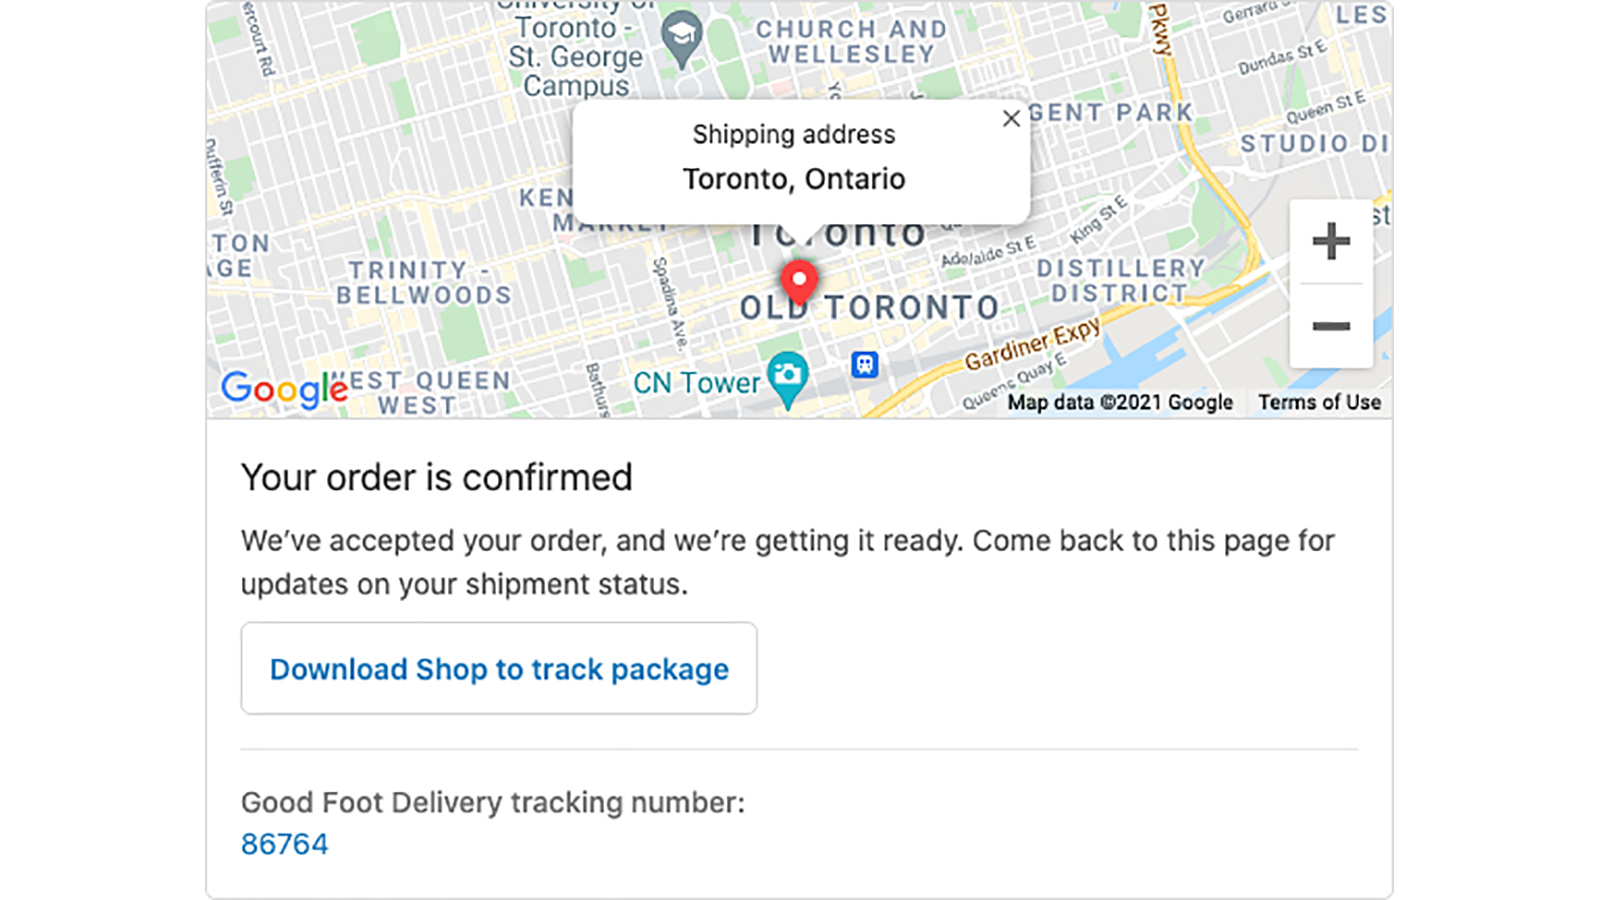 Good Foot Delivery tracking order number